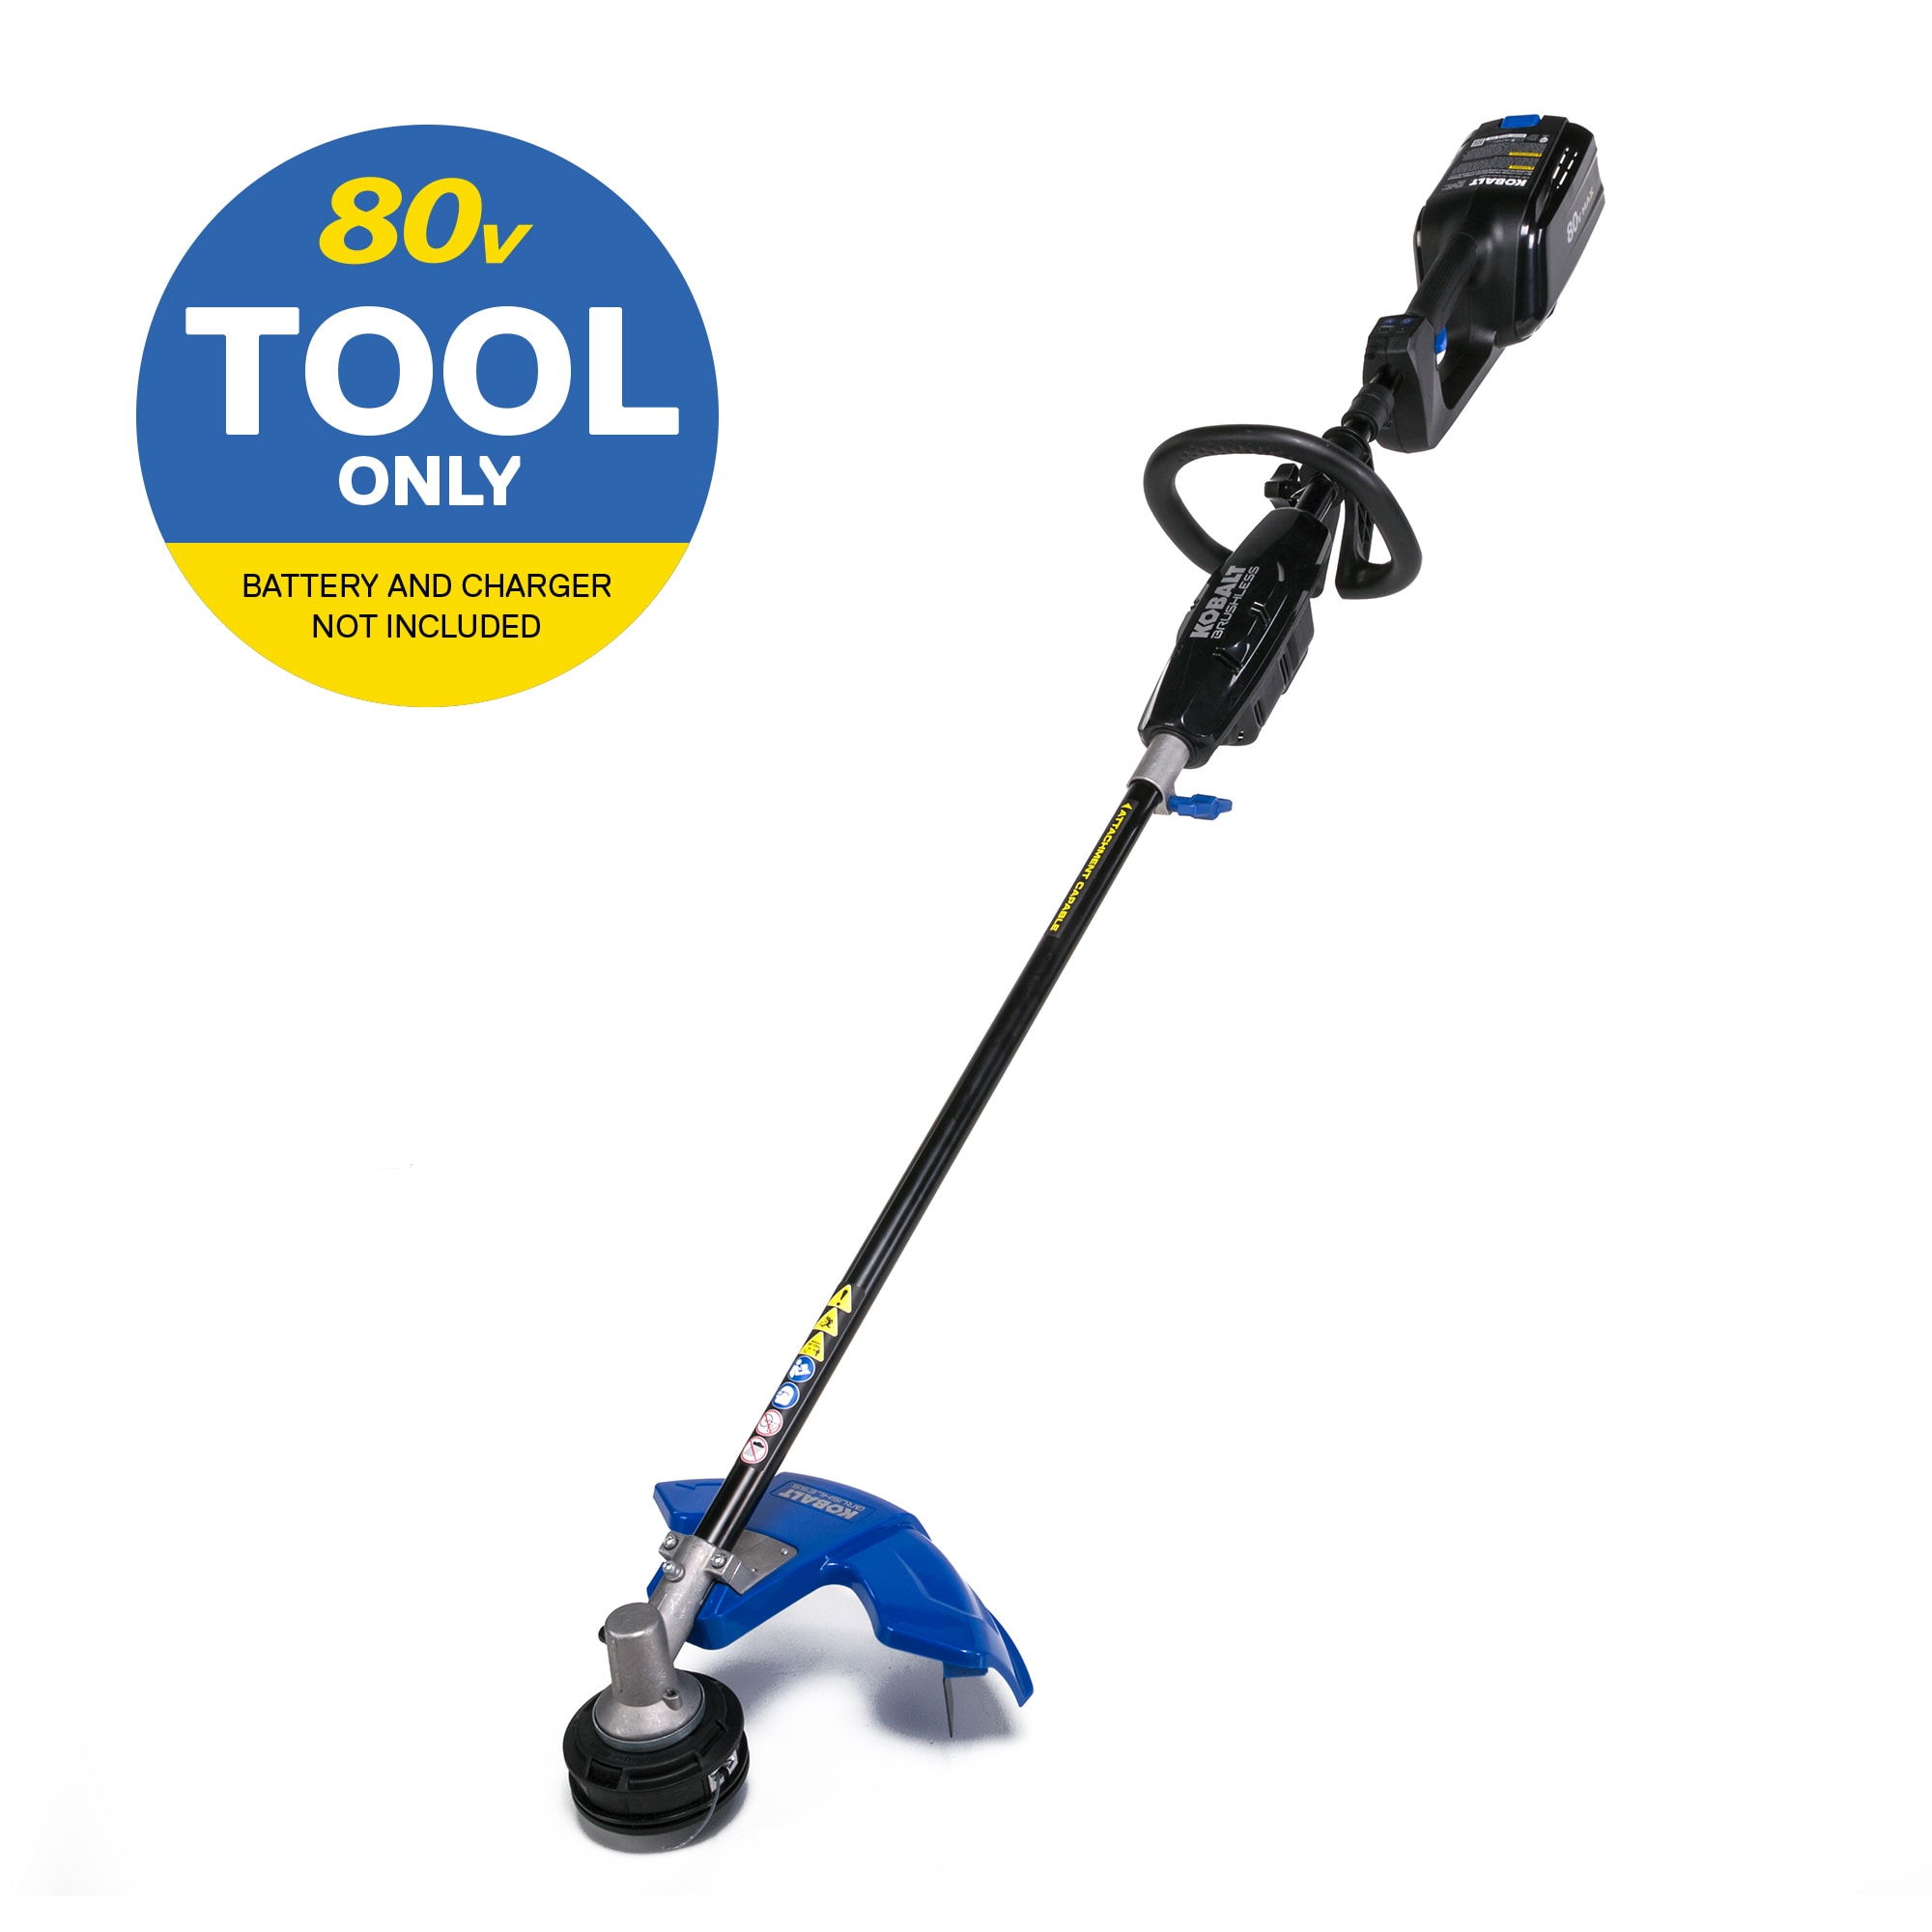 https://discounttoday.net/wp-content/uploads/2022/09/Kobalt-KST-140XB-80-volt-Max-16-in-Straight-Cordless-String-Trimmer-with-Attachment-Capable-Tool-Only1.jpg